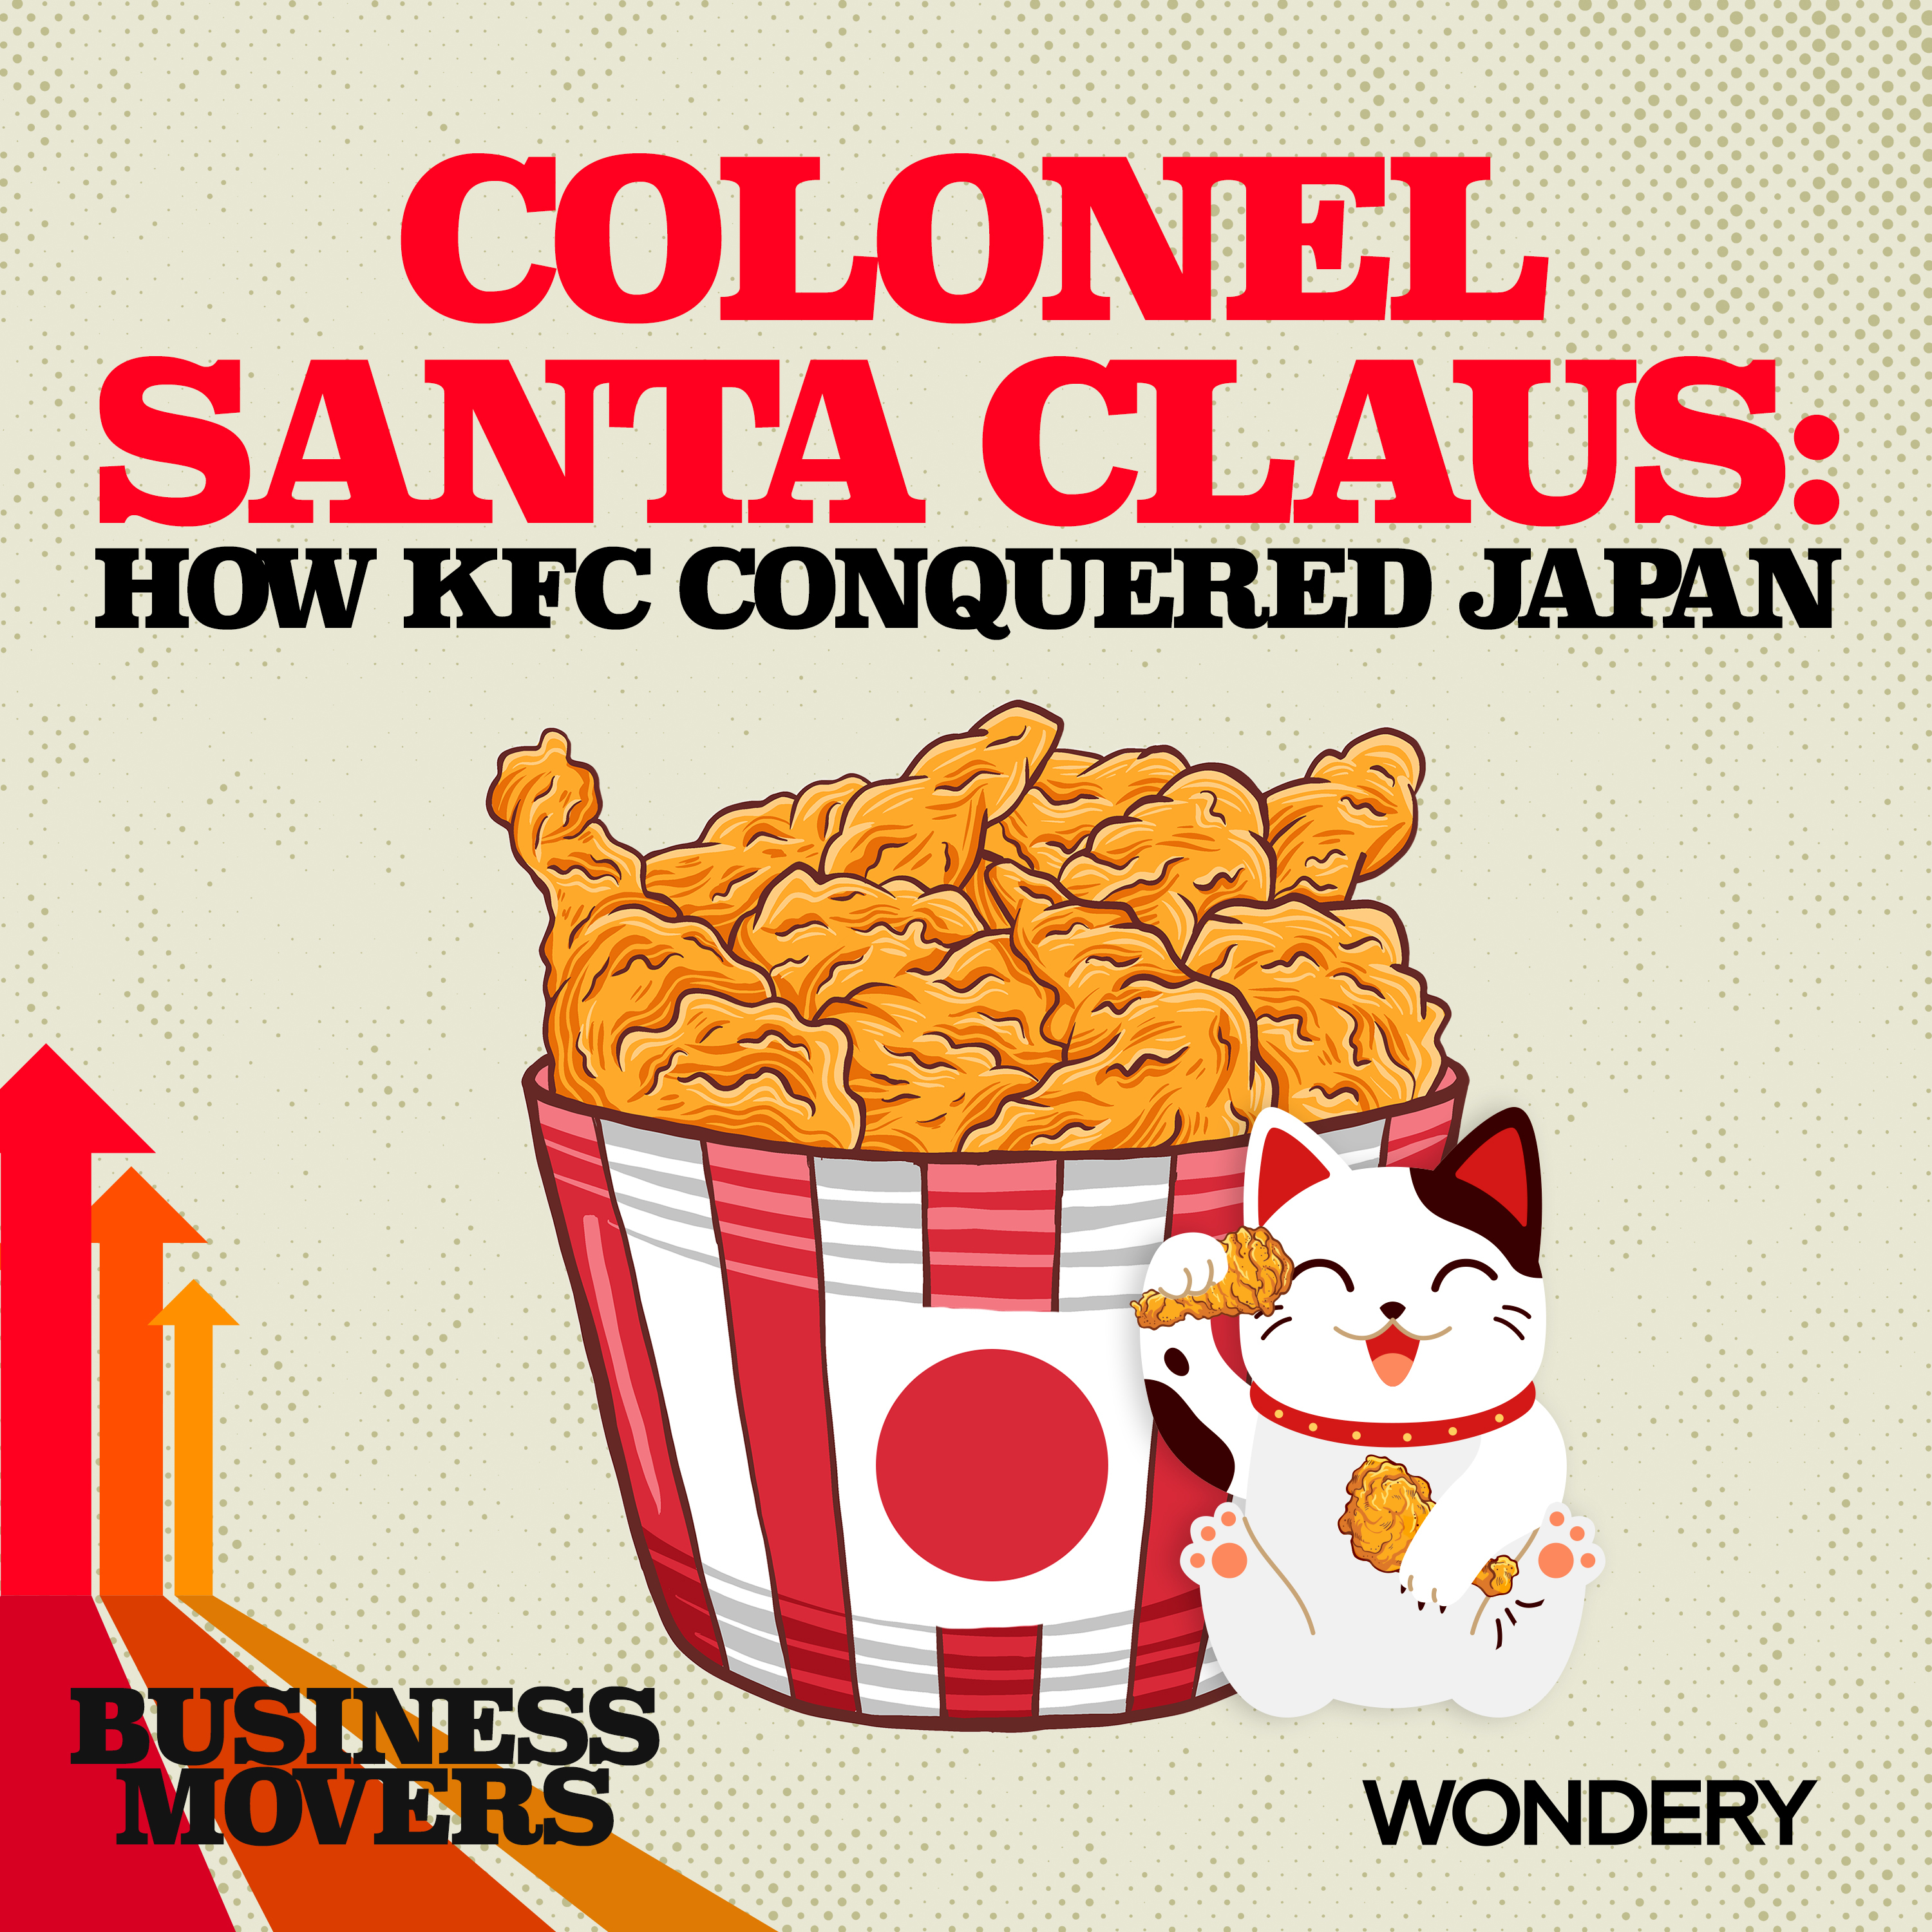 Colonel Santa Claus | Professor Eric Rath on the Globalization of Fast-Food | 2